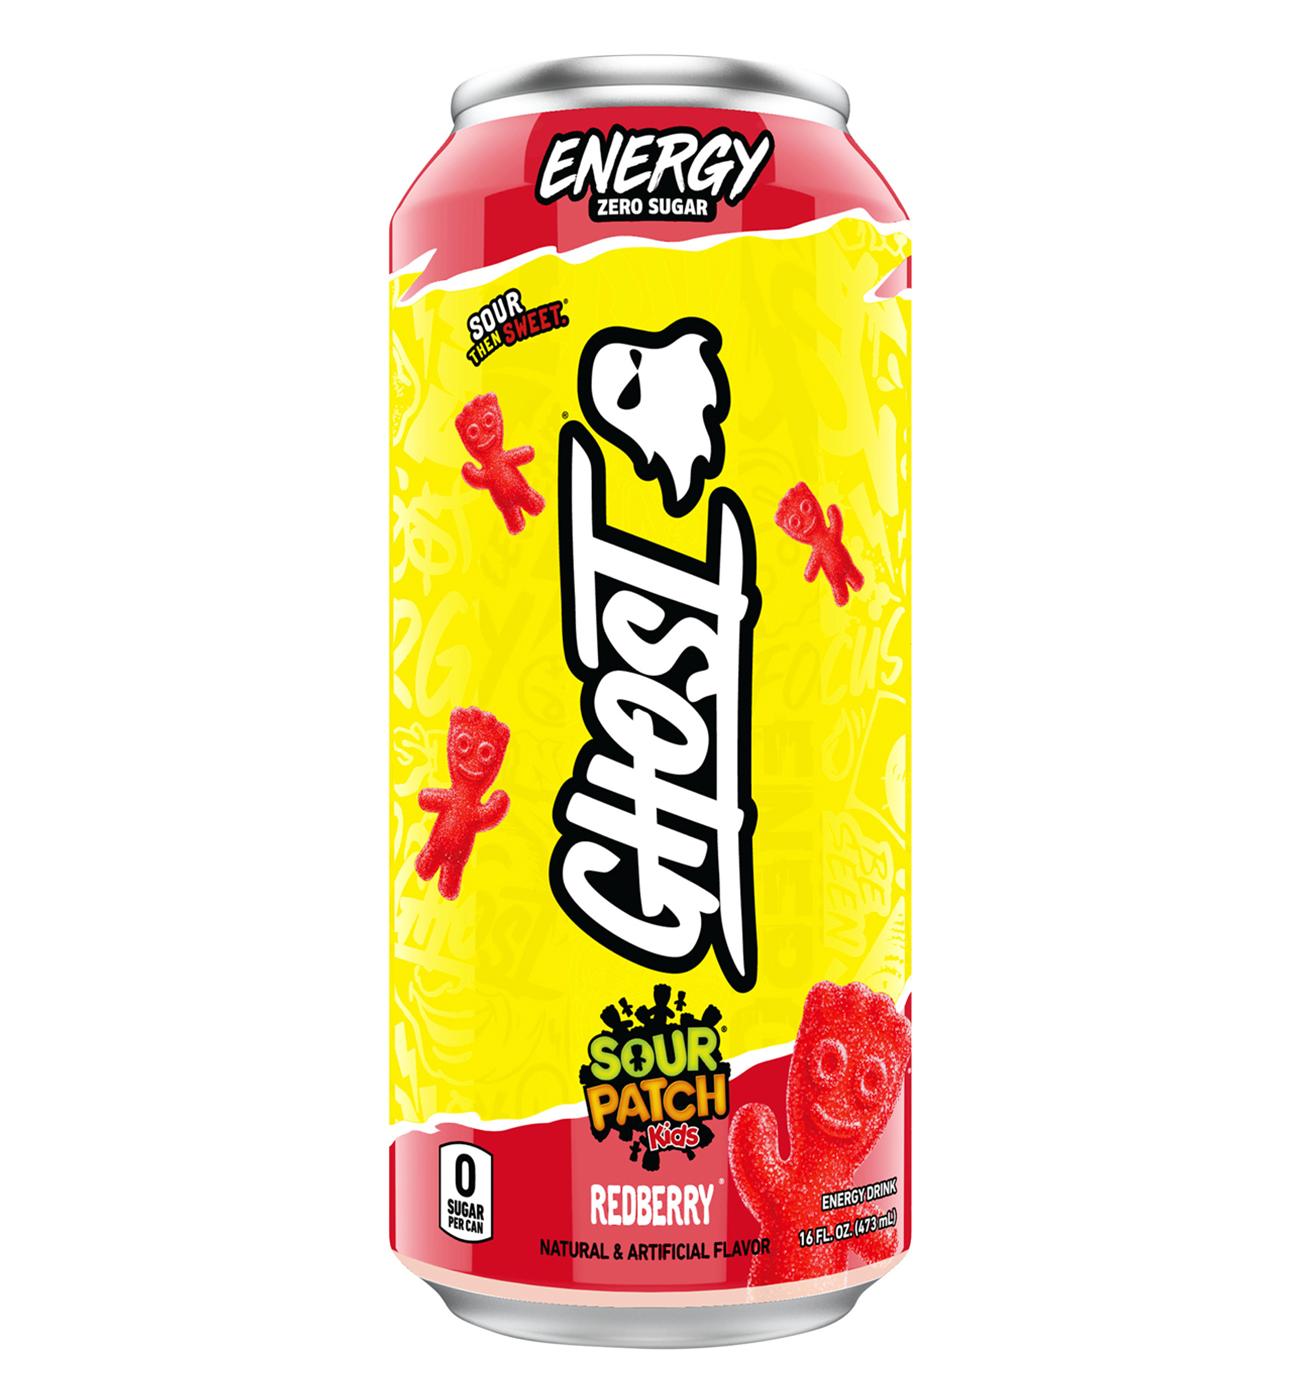 Ghost Energy Drink - Sour Patch Kids Redberry ; image 1 of 2